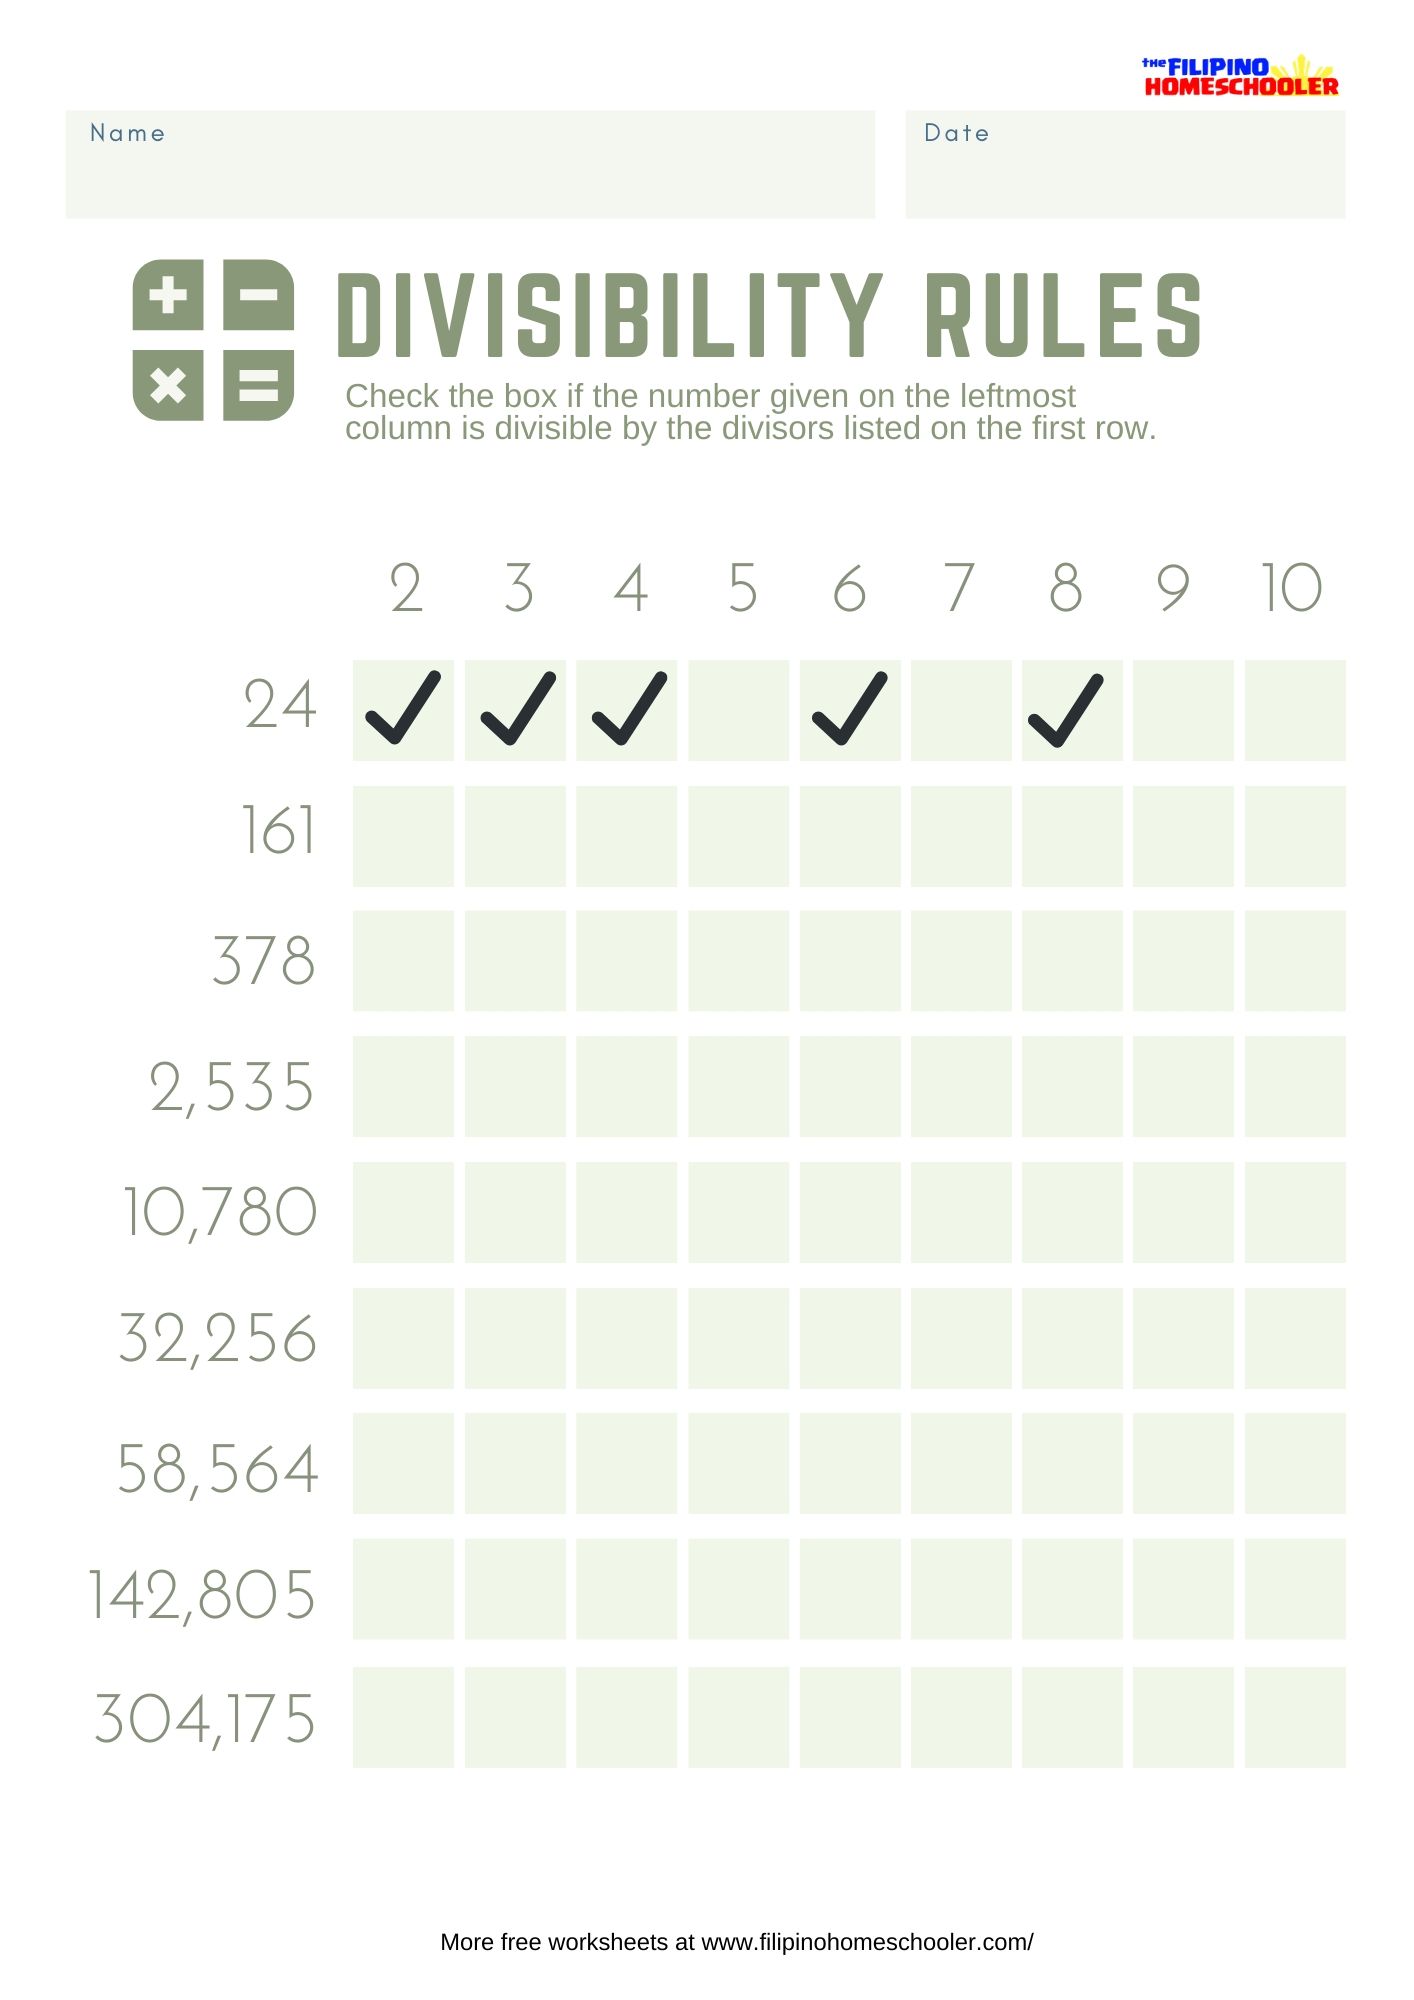 Worksheet For Divisibility Rules